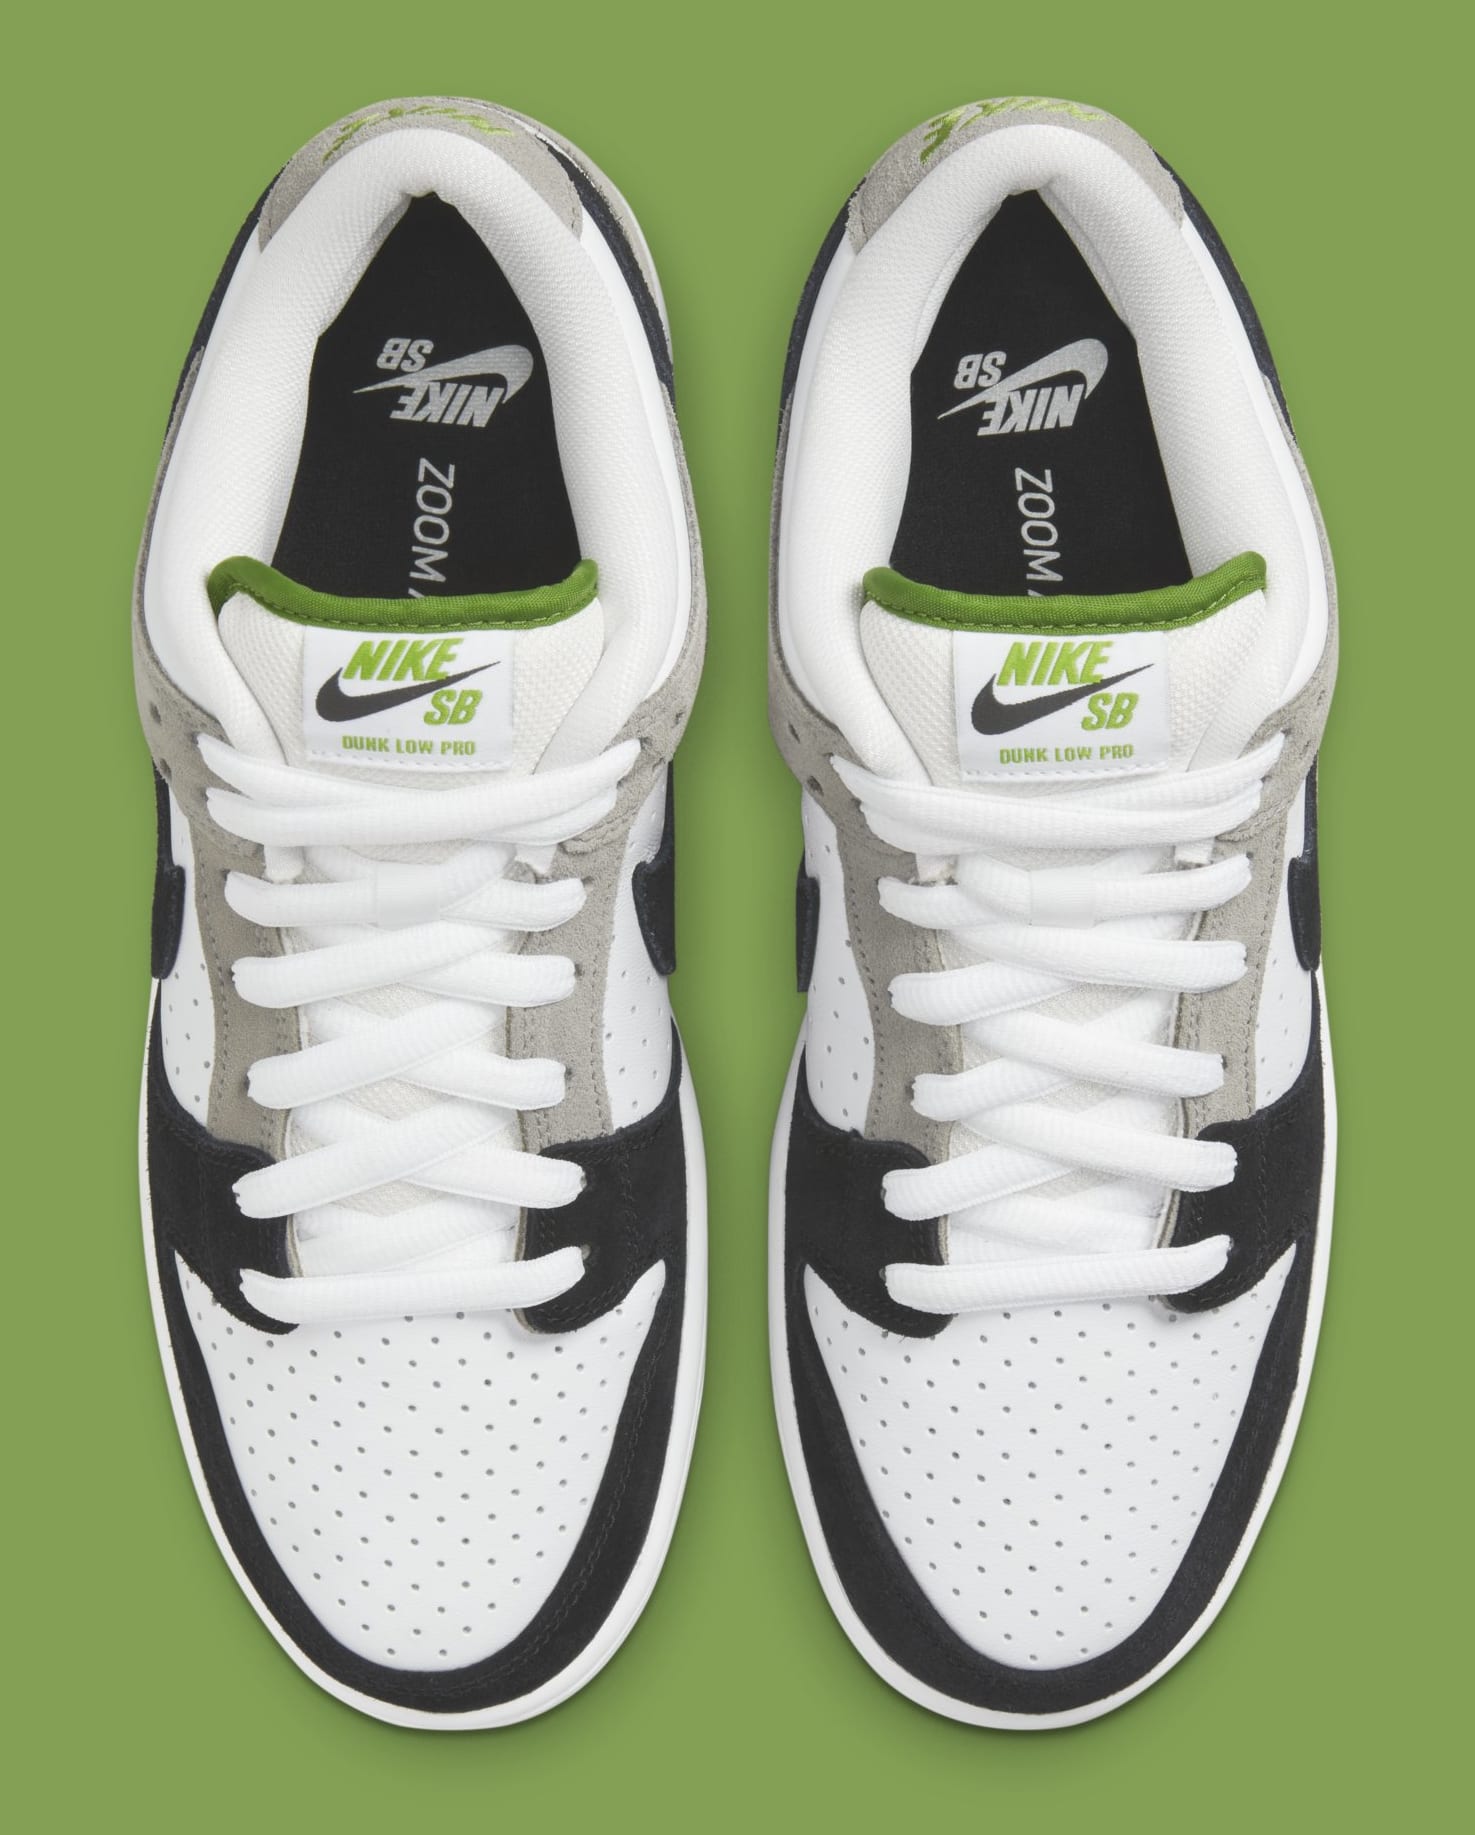 Nike Sb Dunk Low Pro 'Chlorophyll' Release Date Bq6817-011 | Sole Collector